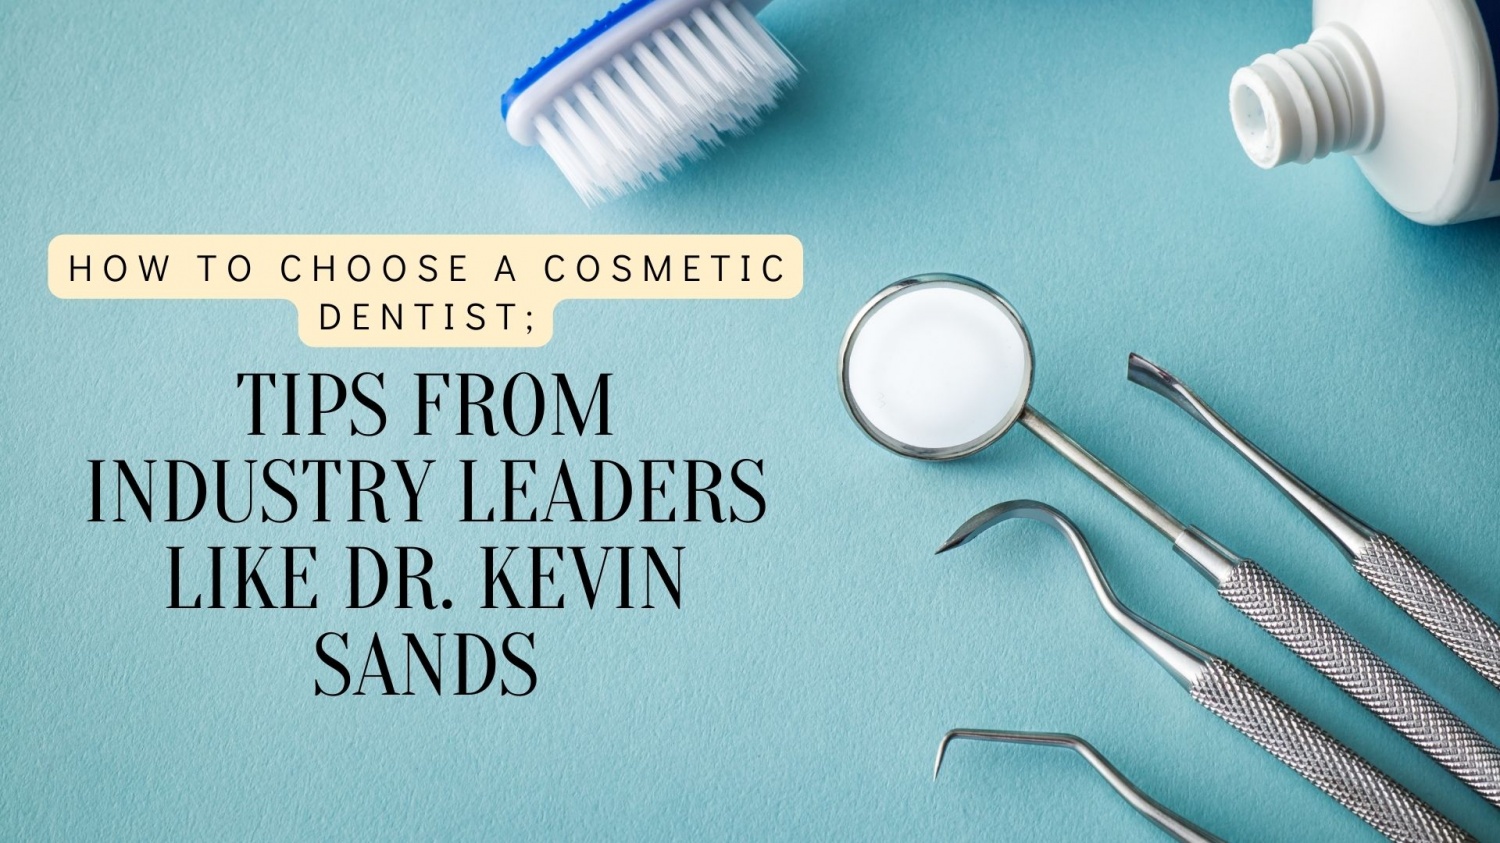 How to Choose a Cosmetic Dentist: Tips from Industry Leader Dr. Kevin Sands